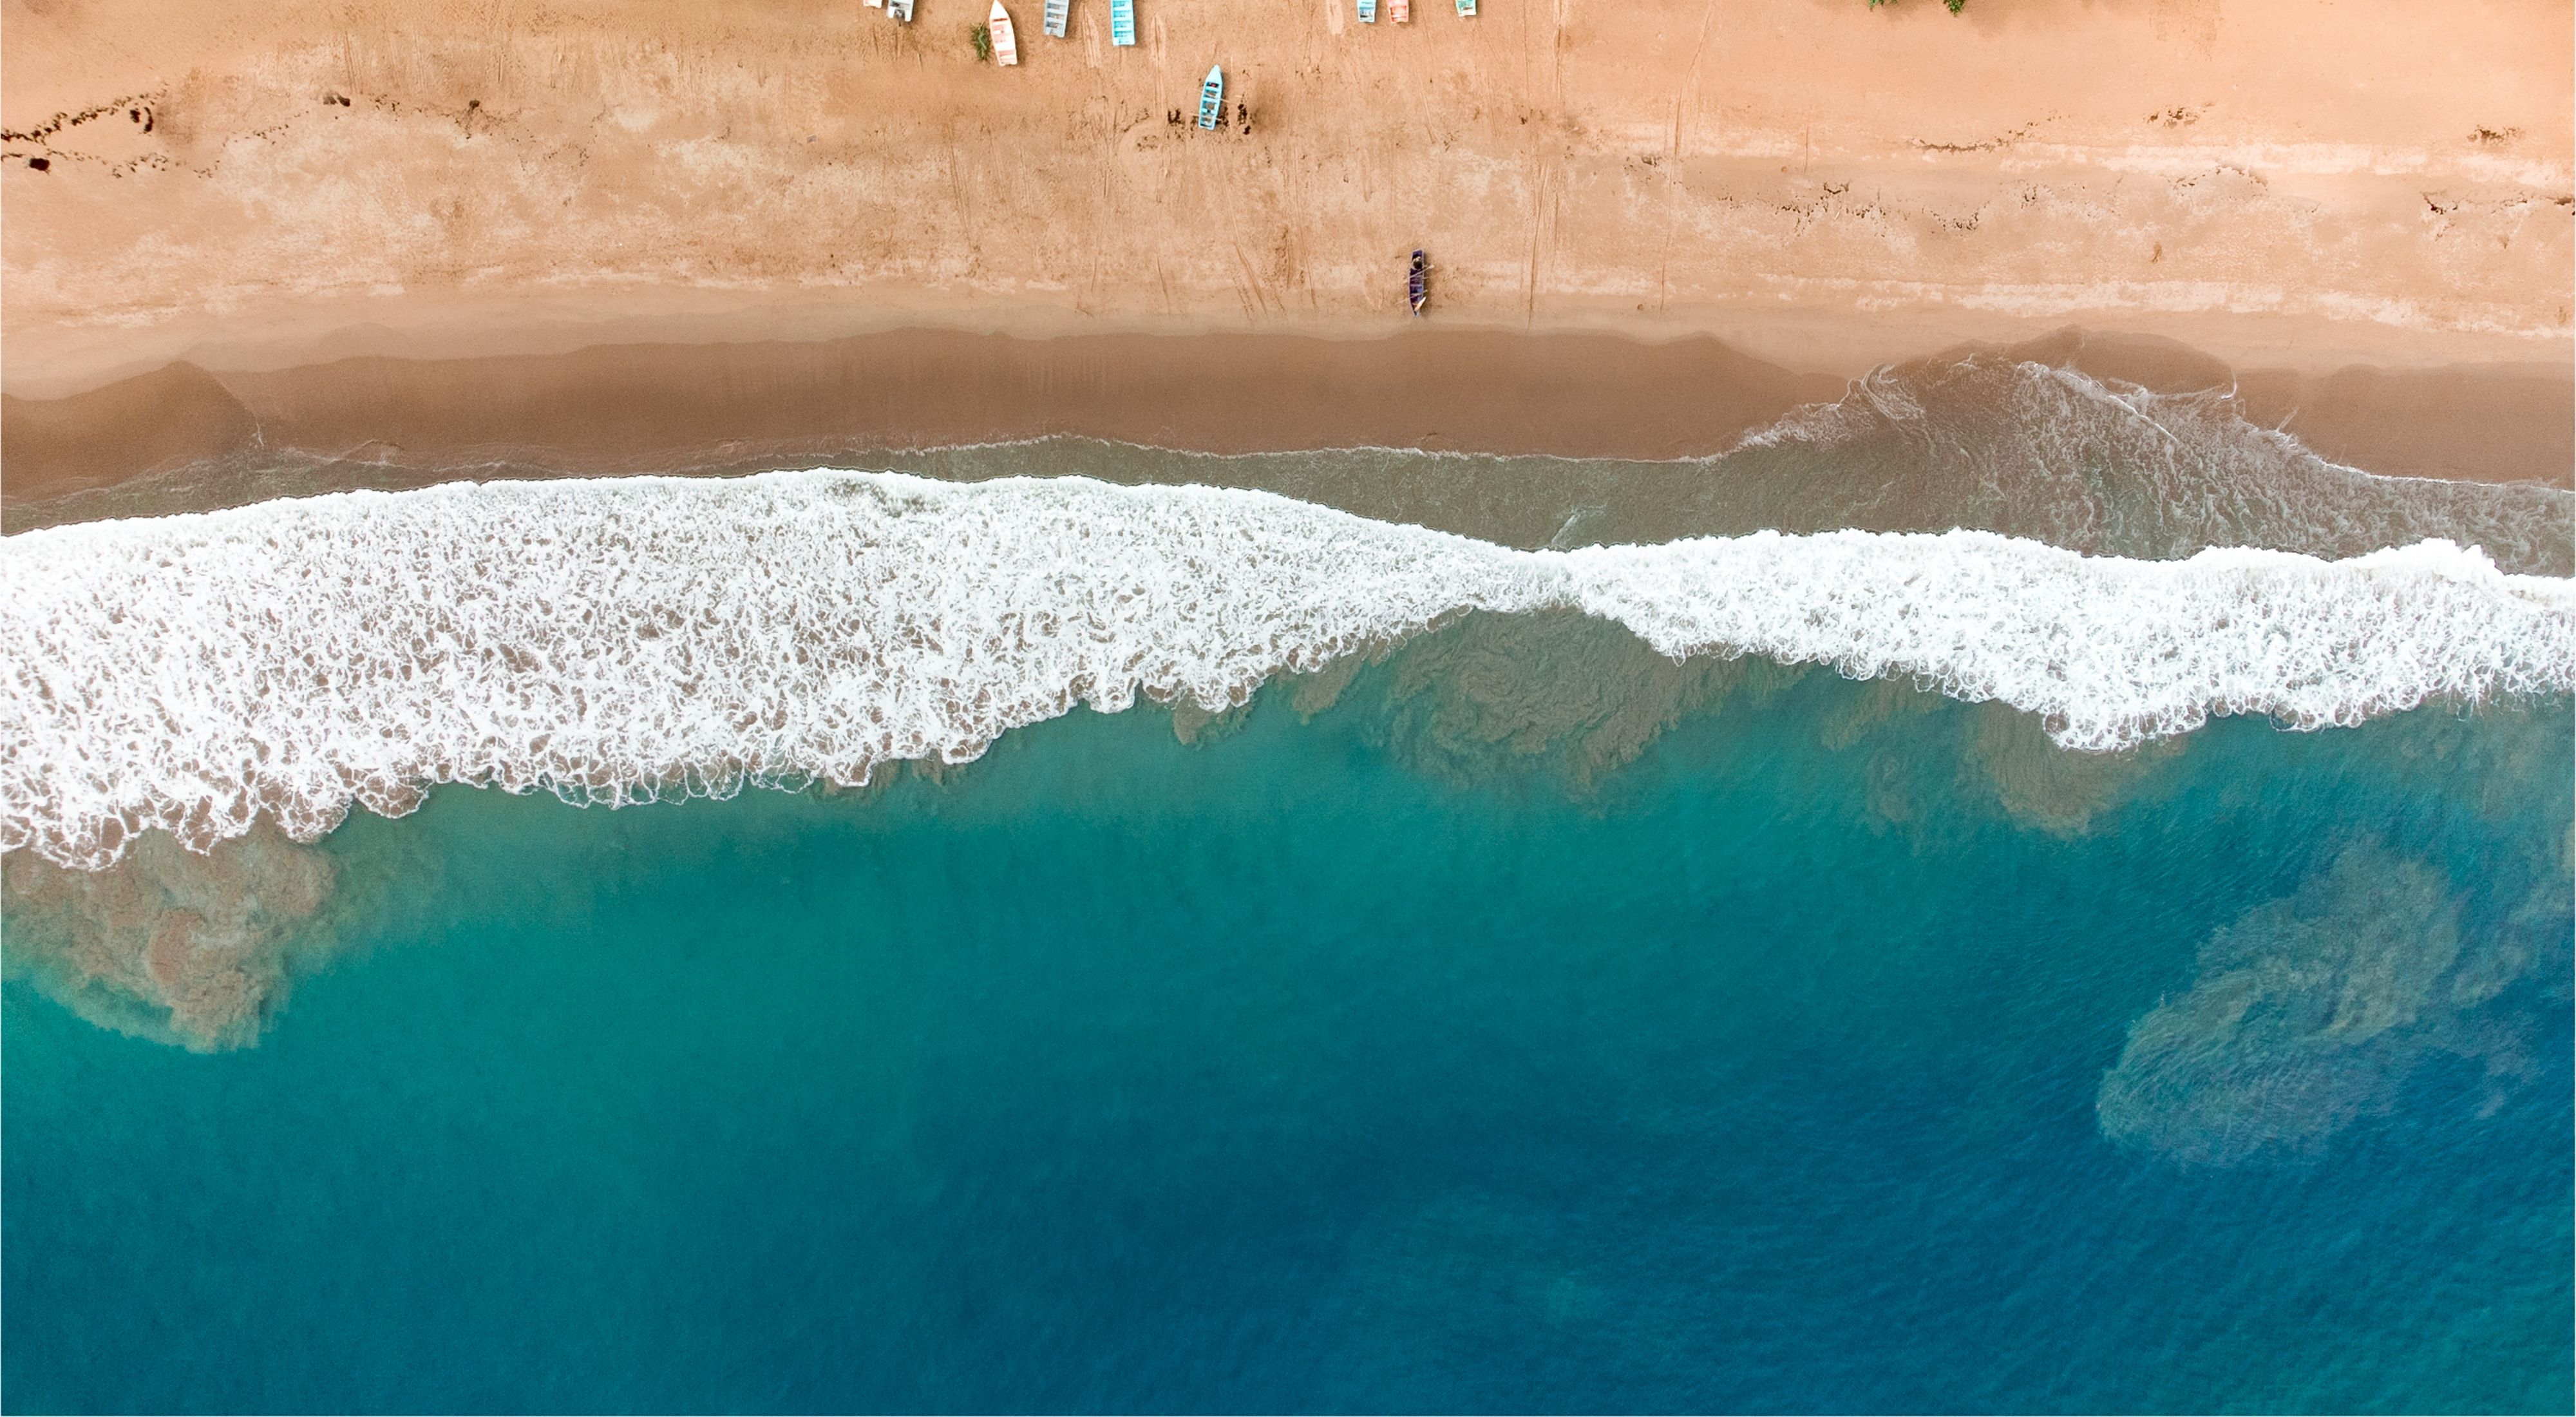 Aerial view of waves lapping against a golden beach in the Dominican Republic.